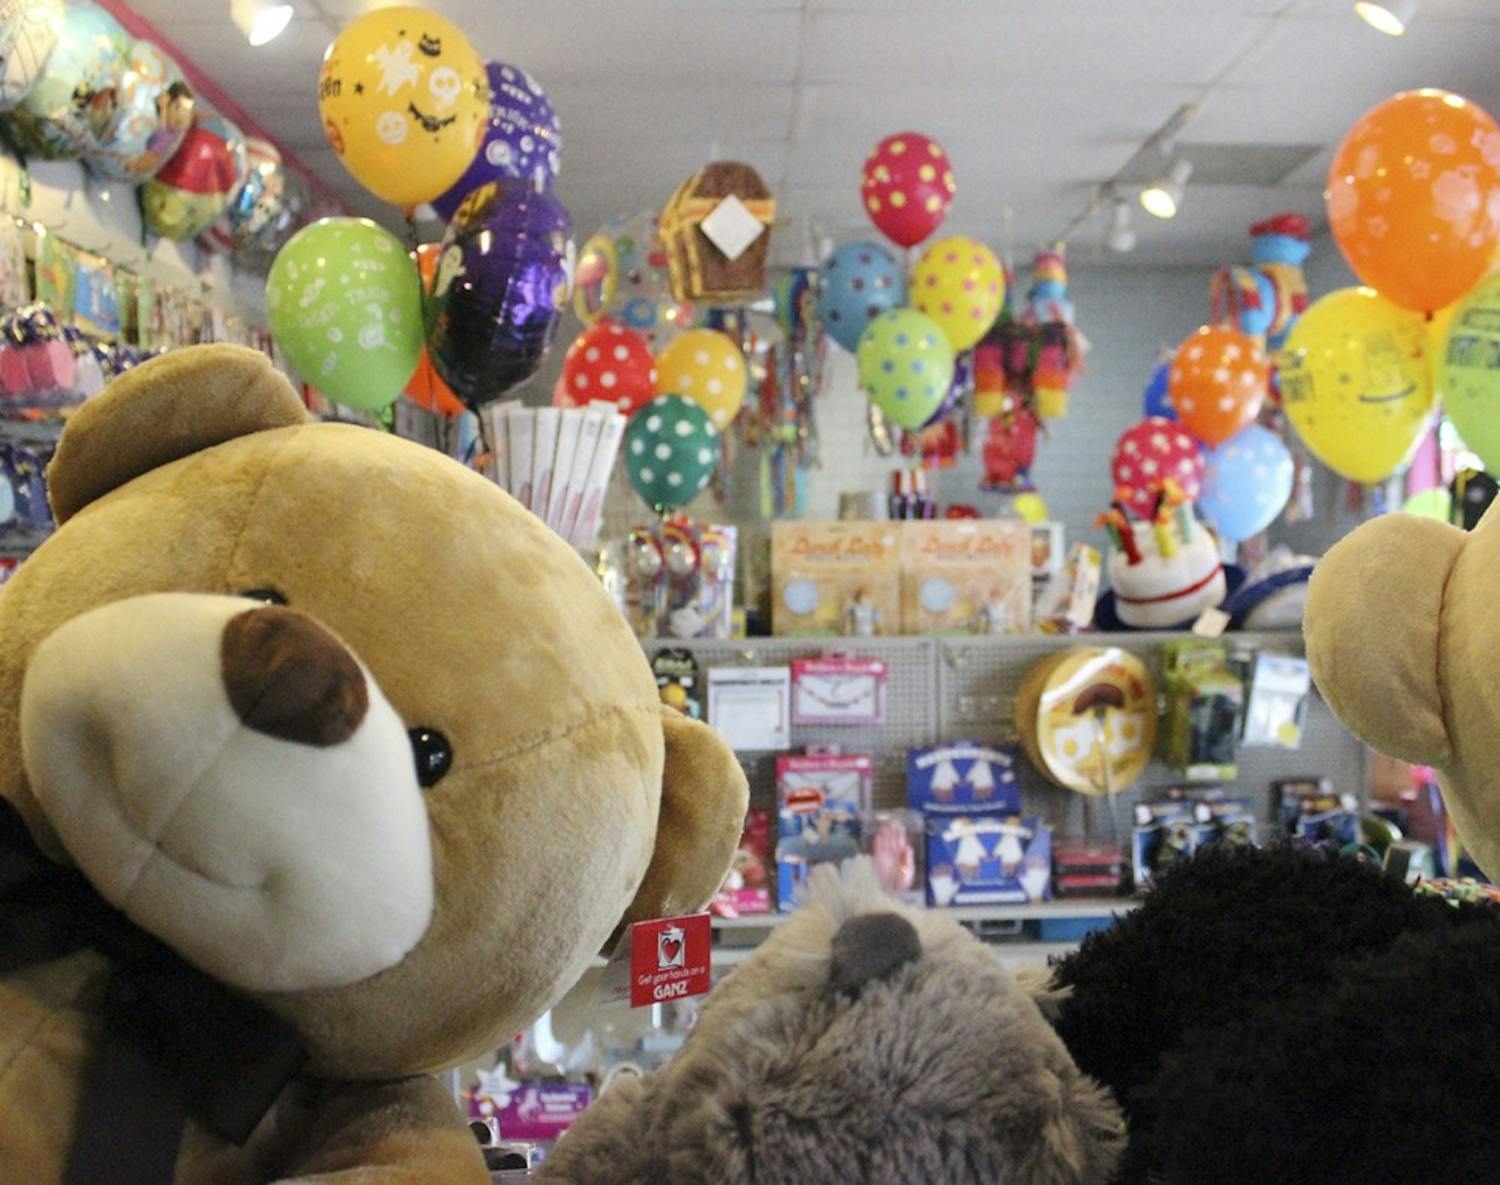 Balloons and Tunes, a balloons, decorations, and gifts store has been operating in Carrboro since 1980. 